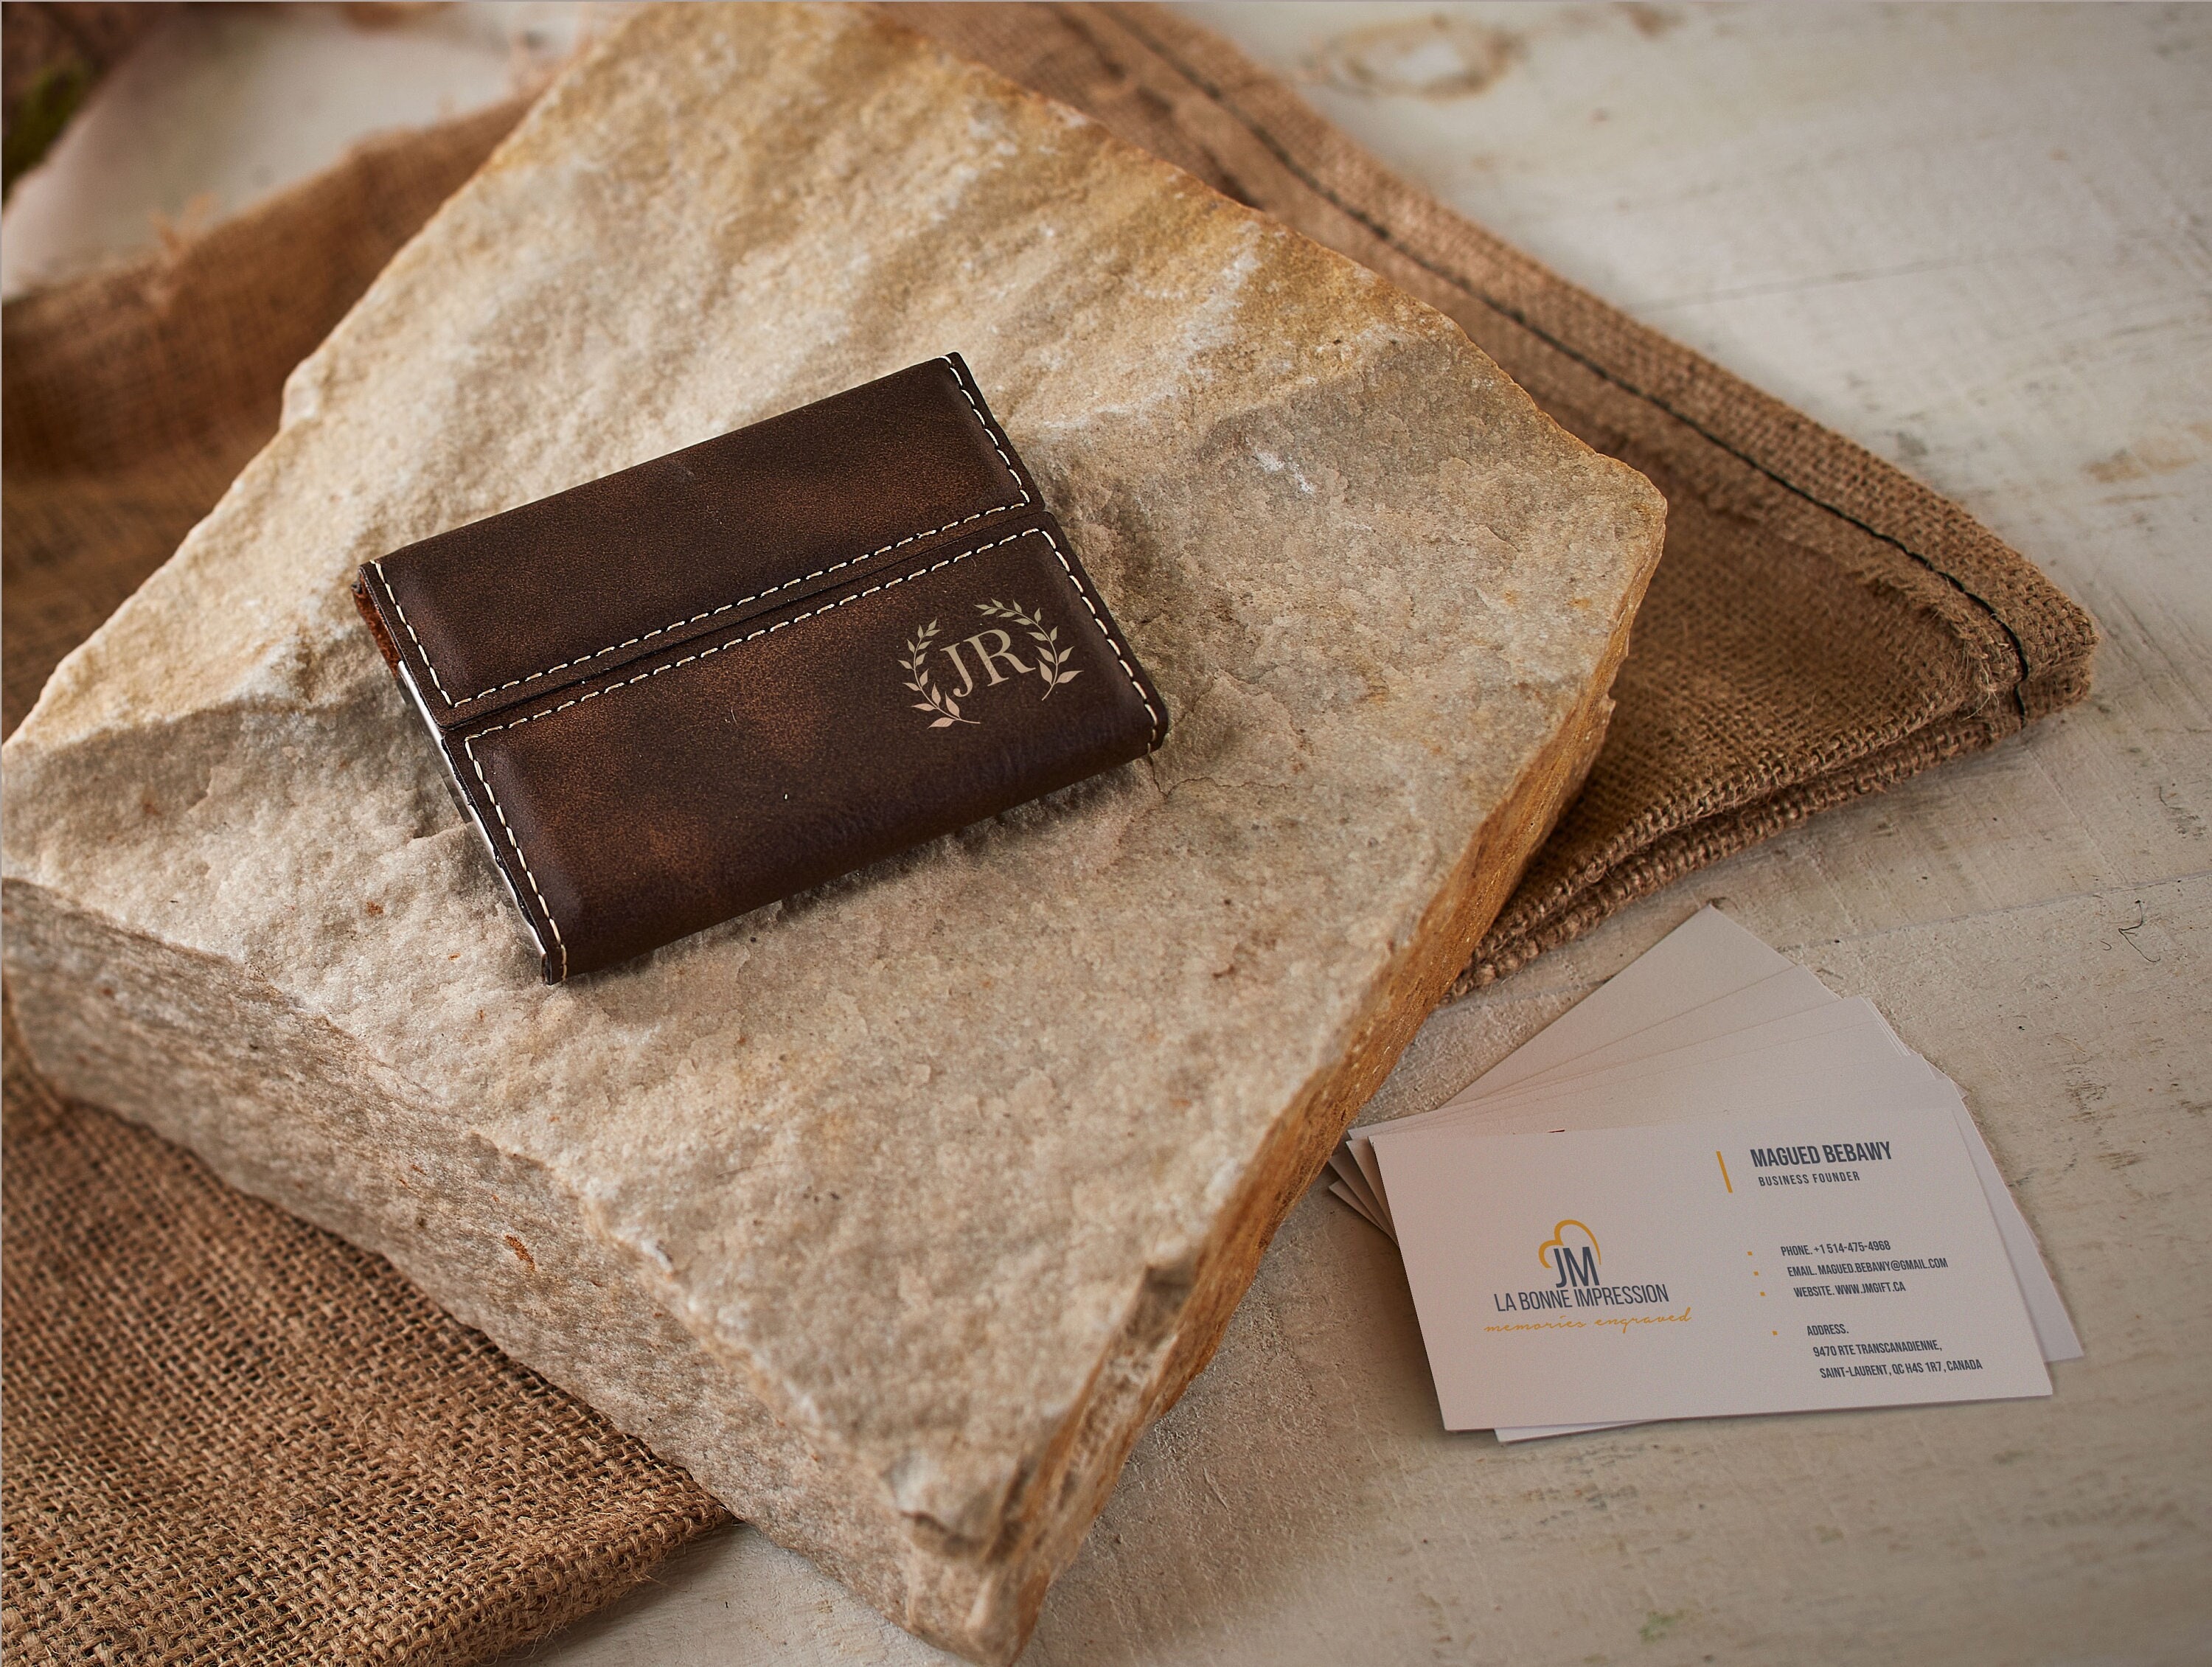 Leather Card Wallet, Men's Brown Leather Card Wallet from Satchel & Page